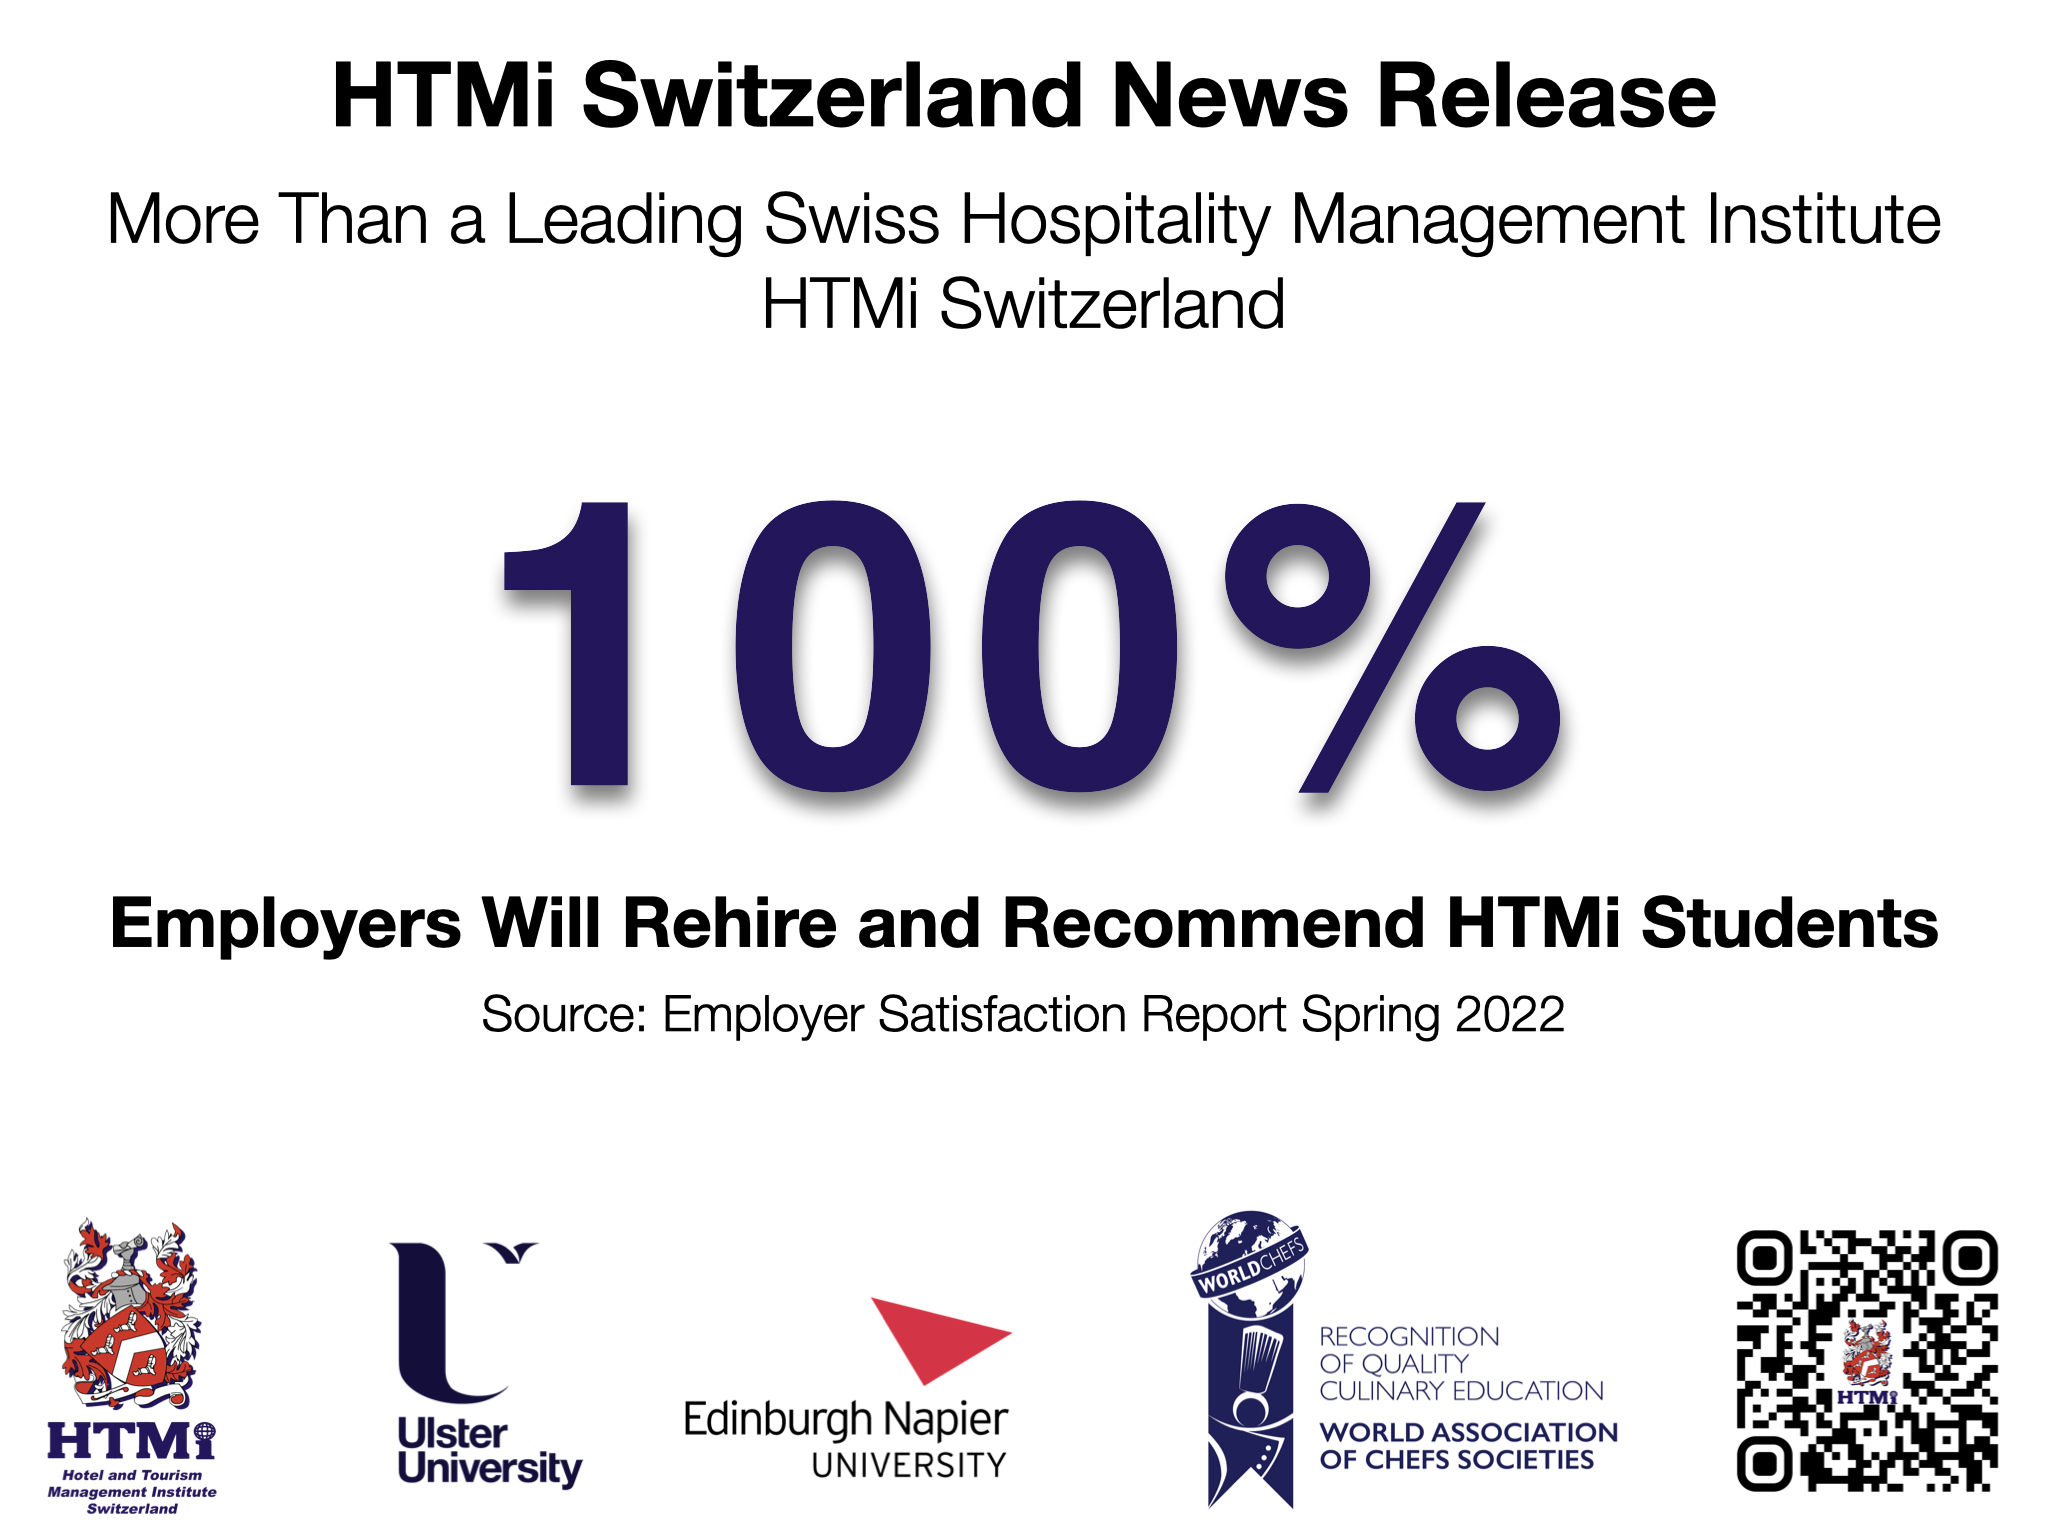 Employer Satisfaction Report Spring 2022 - 100% Employers Will Rehire and Recommend HTMi Students - HTMi Switzerland News Release